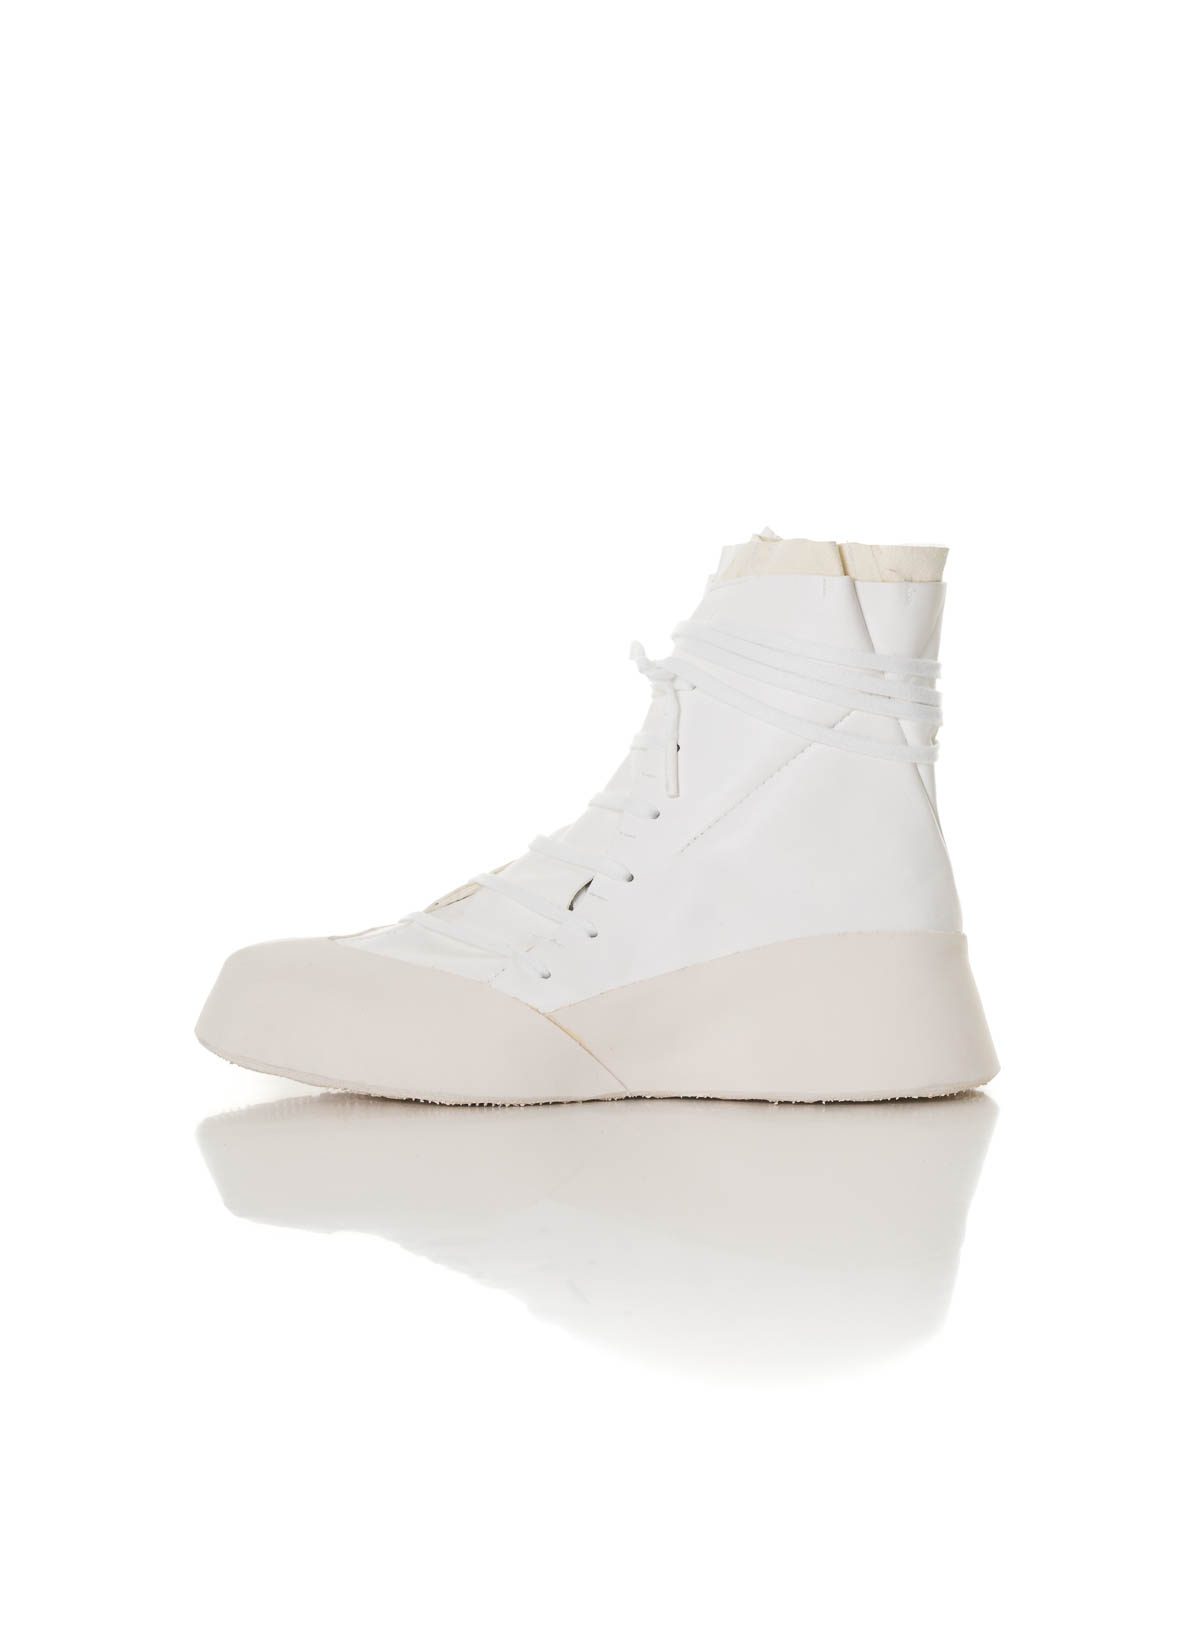 leather Featherweight Distortion BLANCK Sneaker, horse High optical EMANUEL white, LEON Top